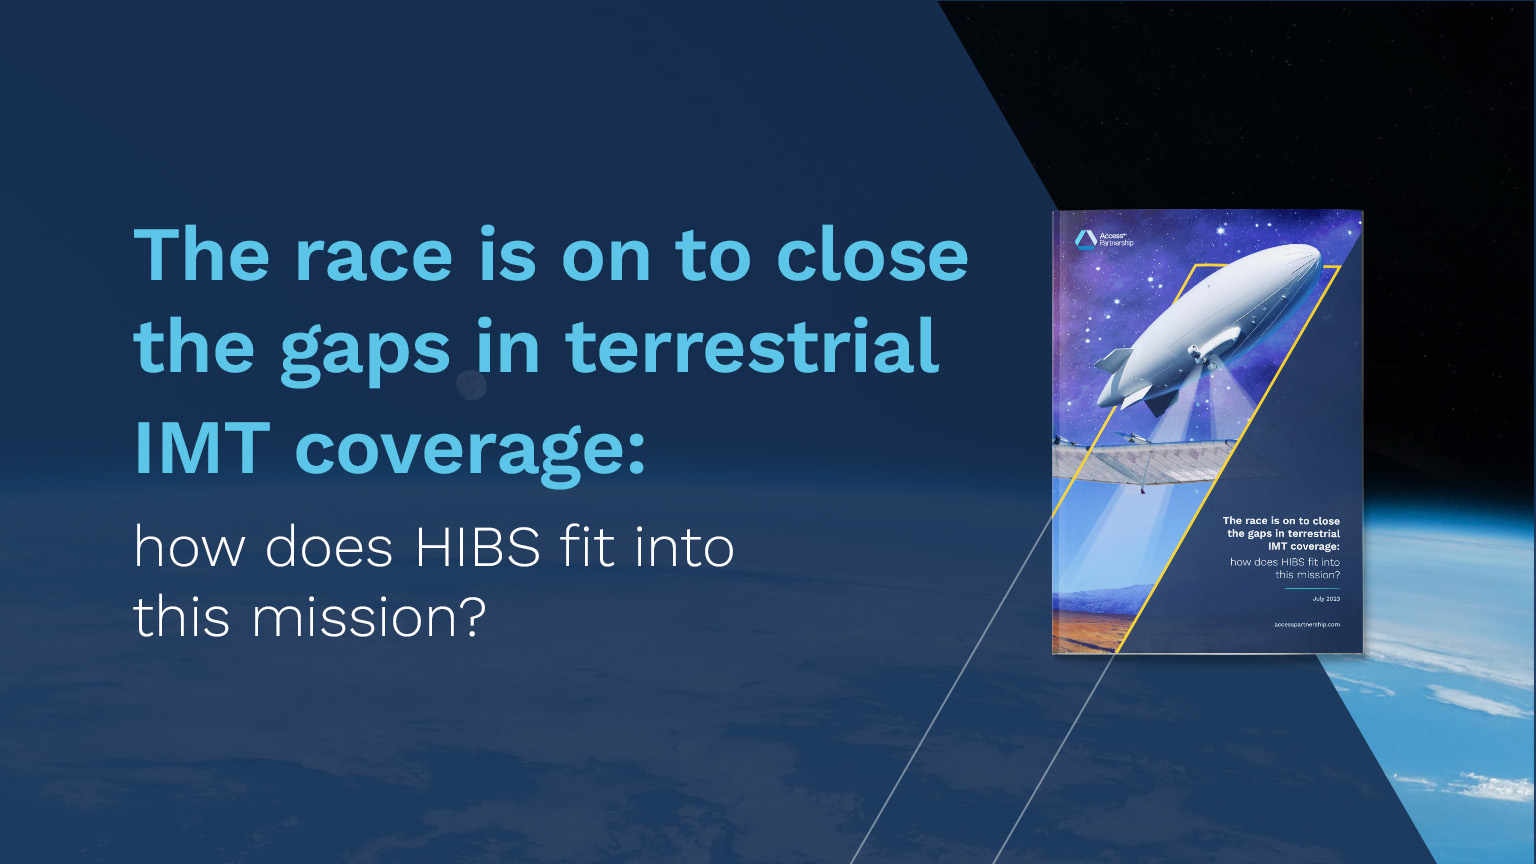 The race is on to close the gaps in terrestrial IMT coverage: how does HIBS fit into this mission?